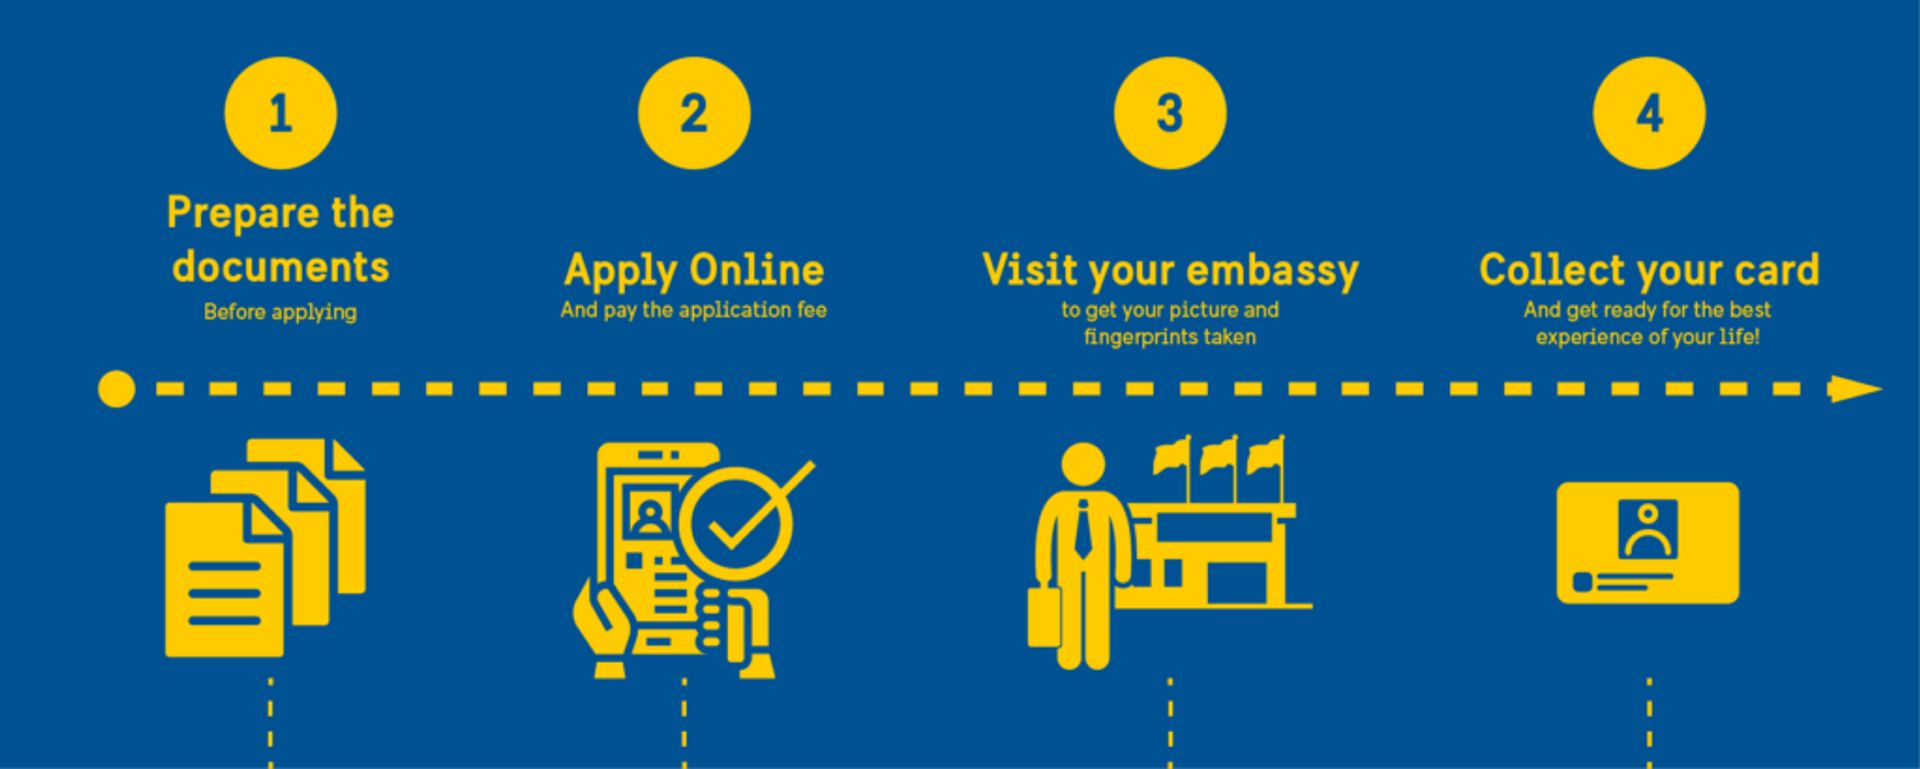 Illustration explaining the 4 steps for applying for a residence permit which are: Prepare the documents, apply online, visit your embassy, then collect your card.